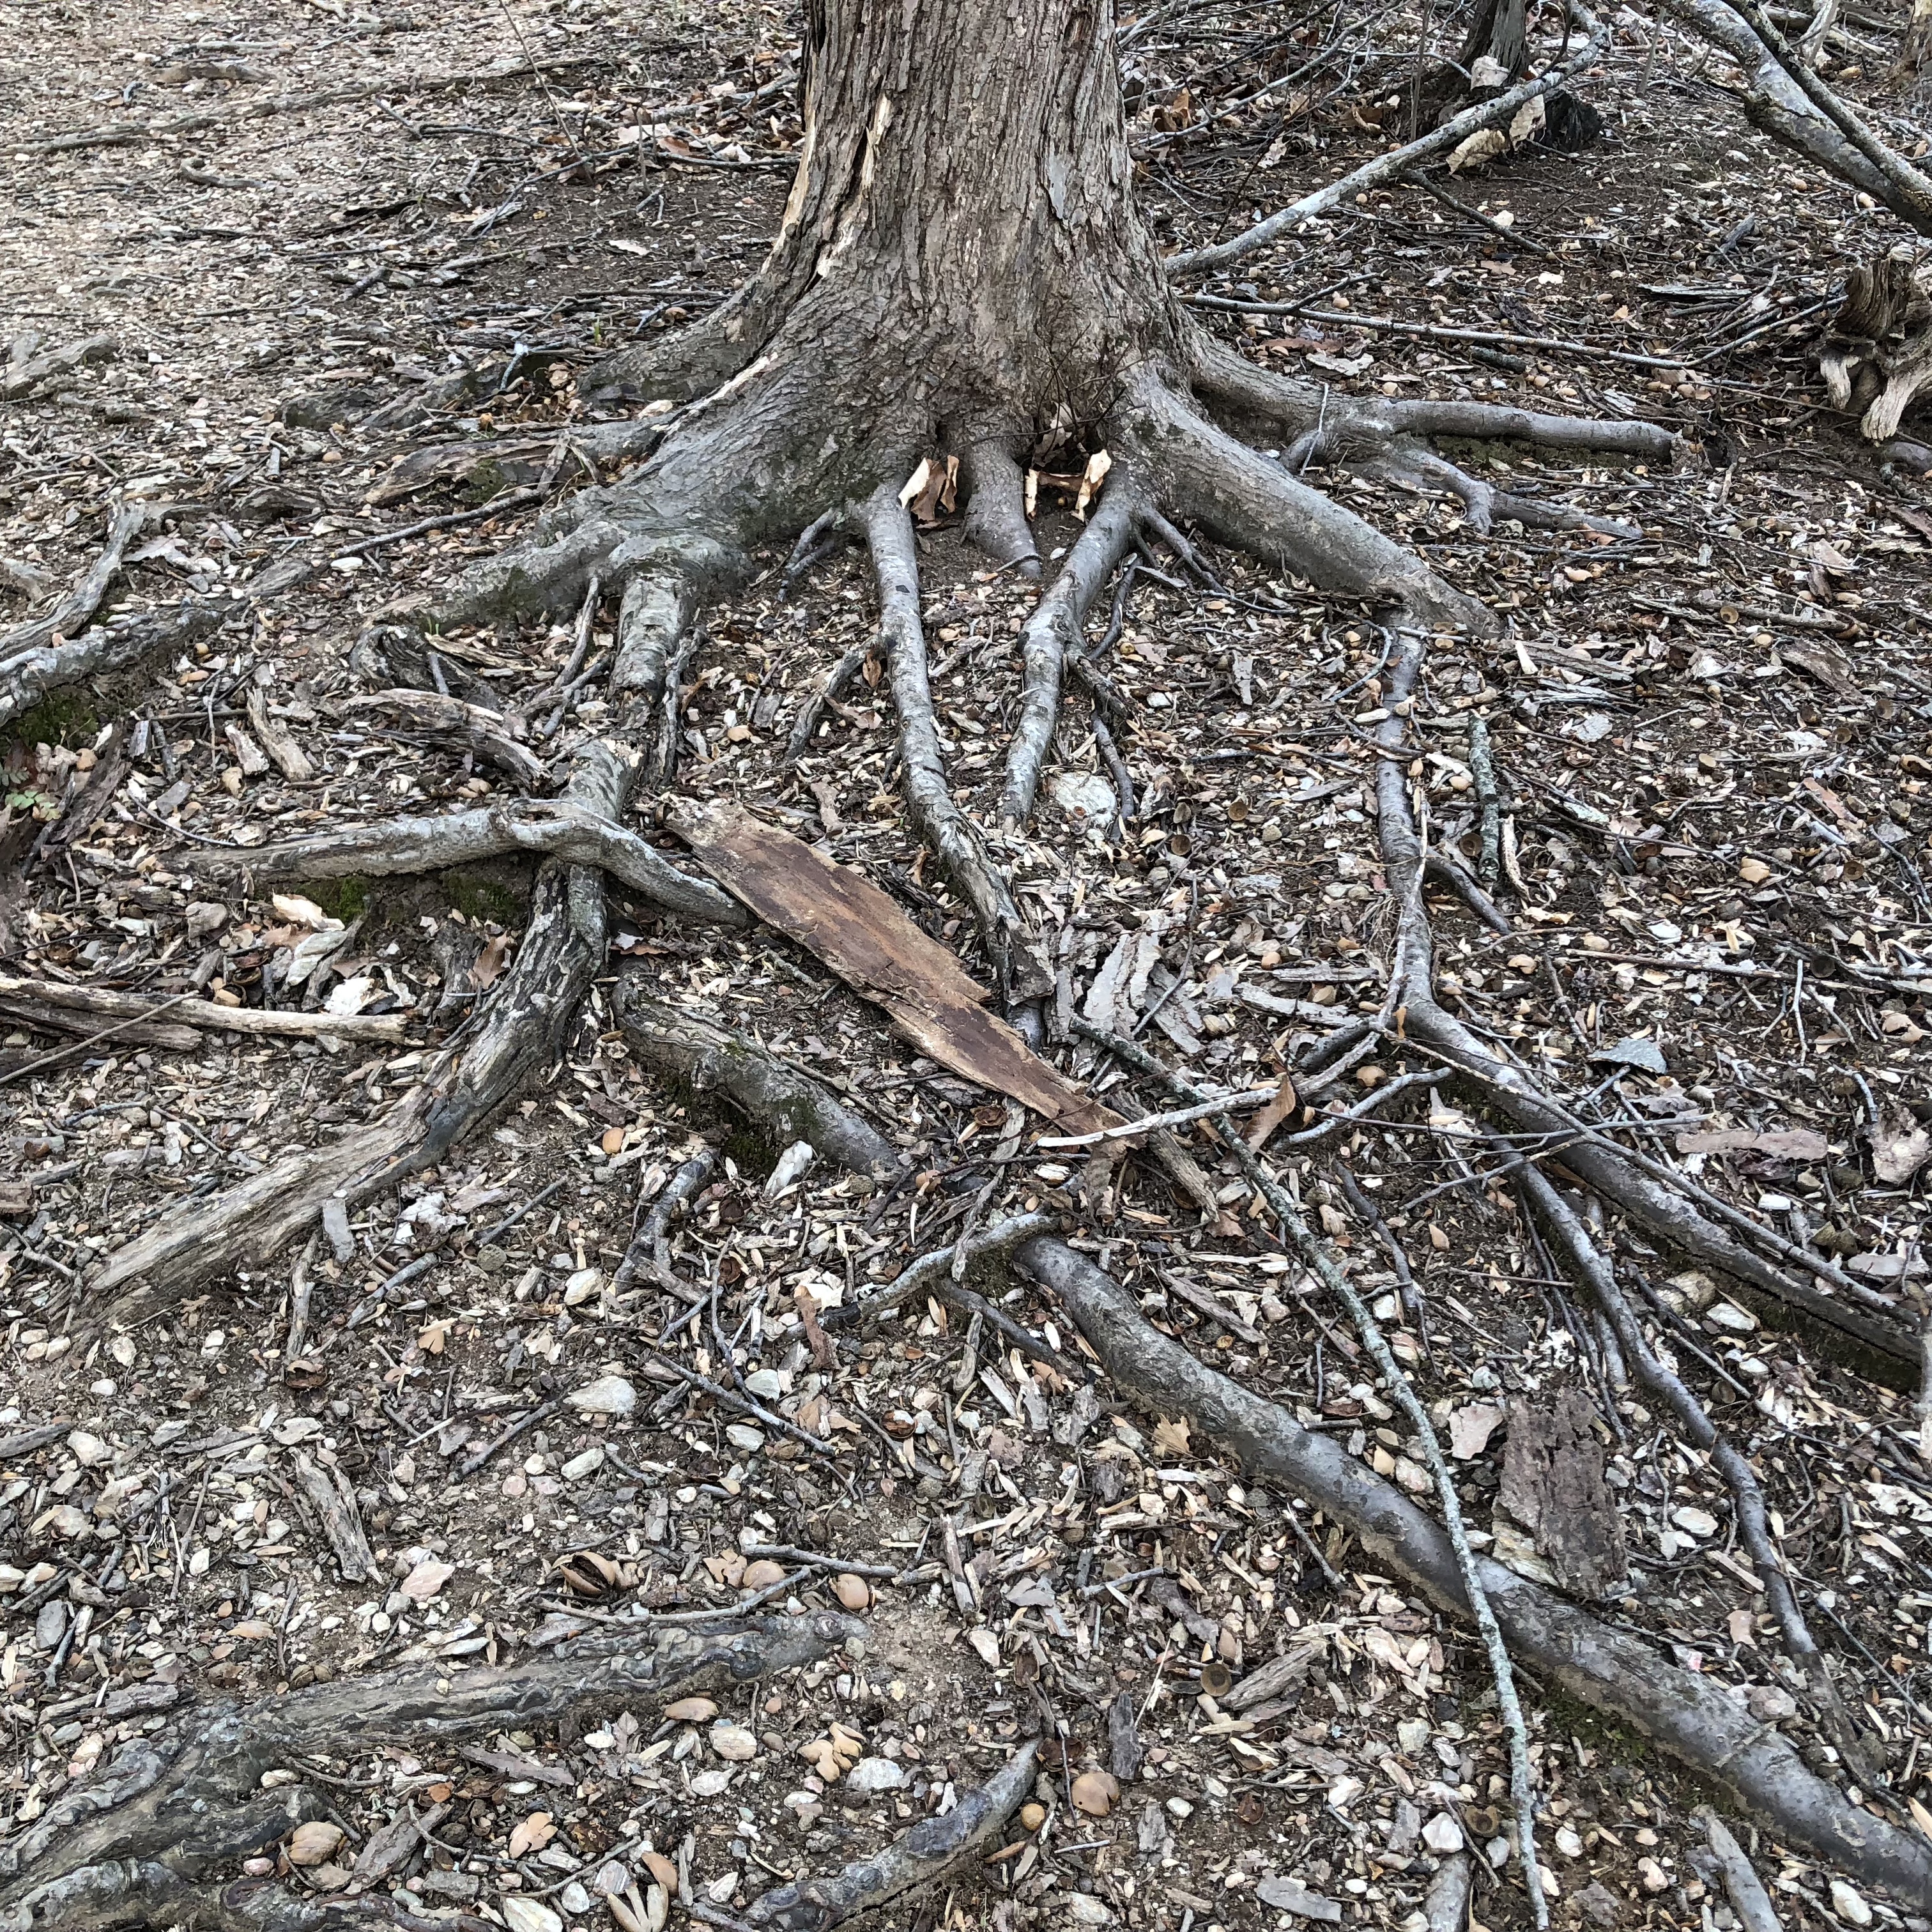 Example of woody roots farther from the trunk.